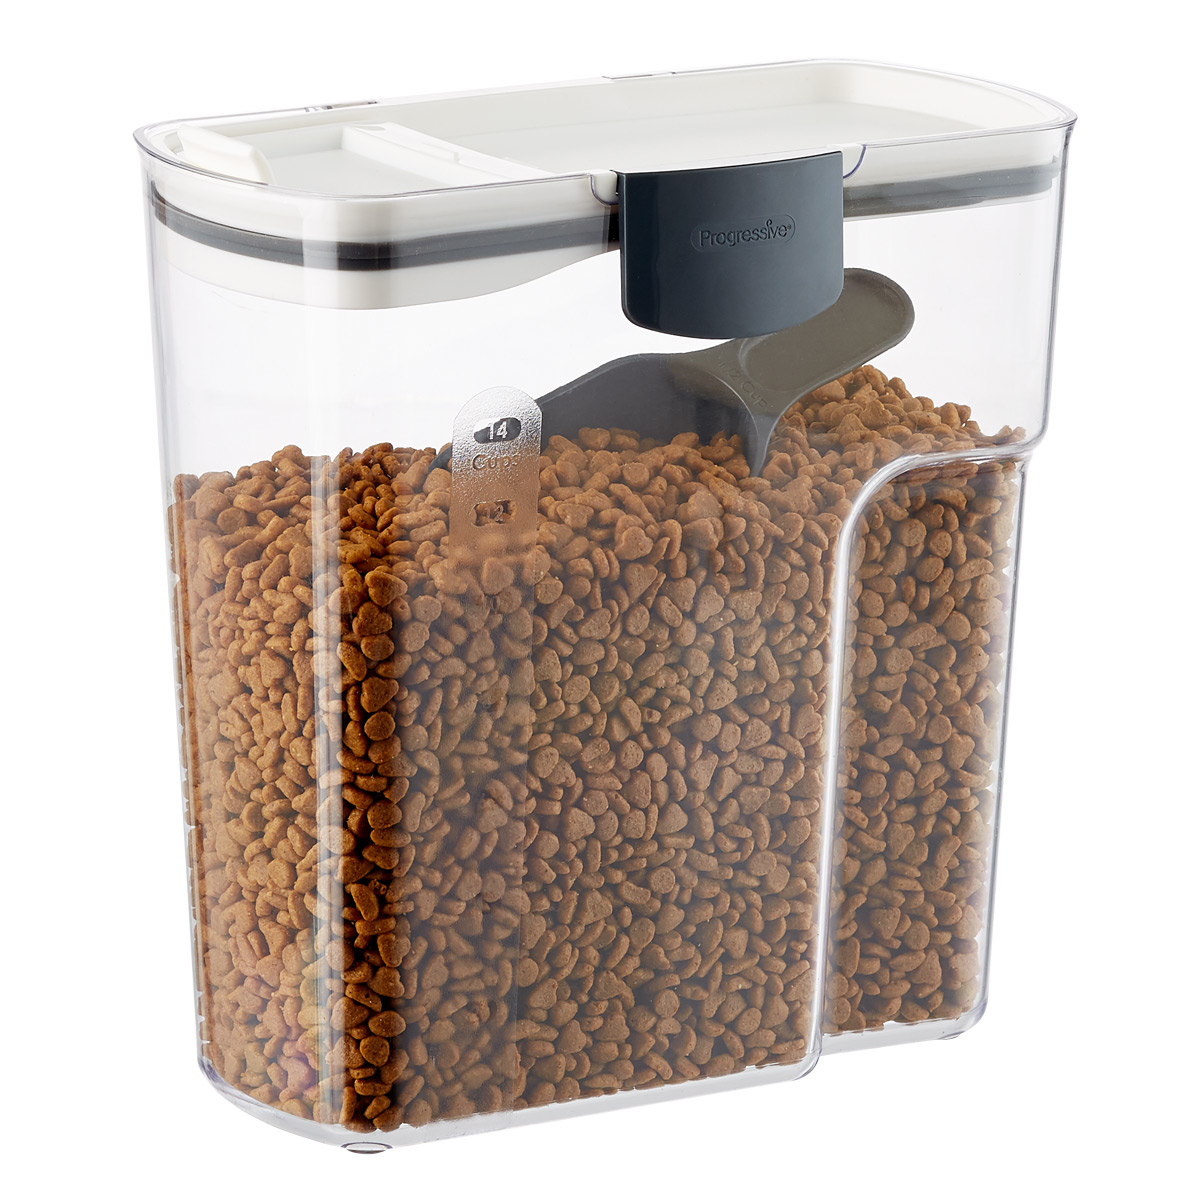 Moisture-proof Pet Food Container - Pet Clever